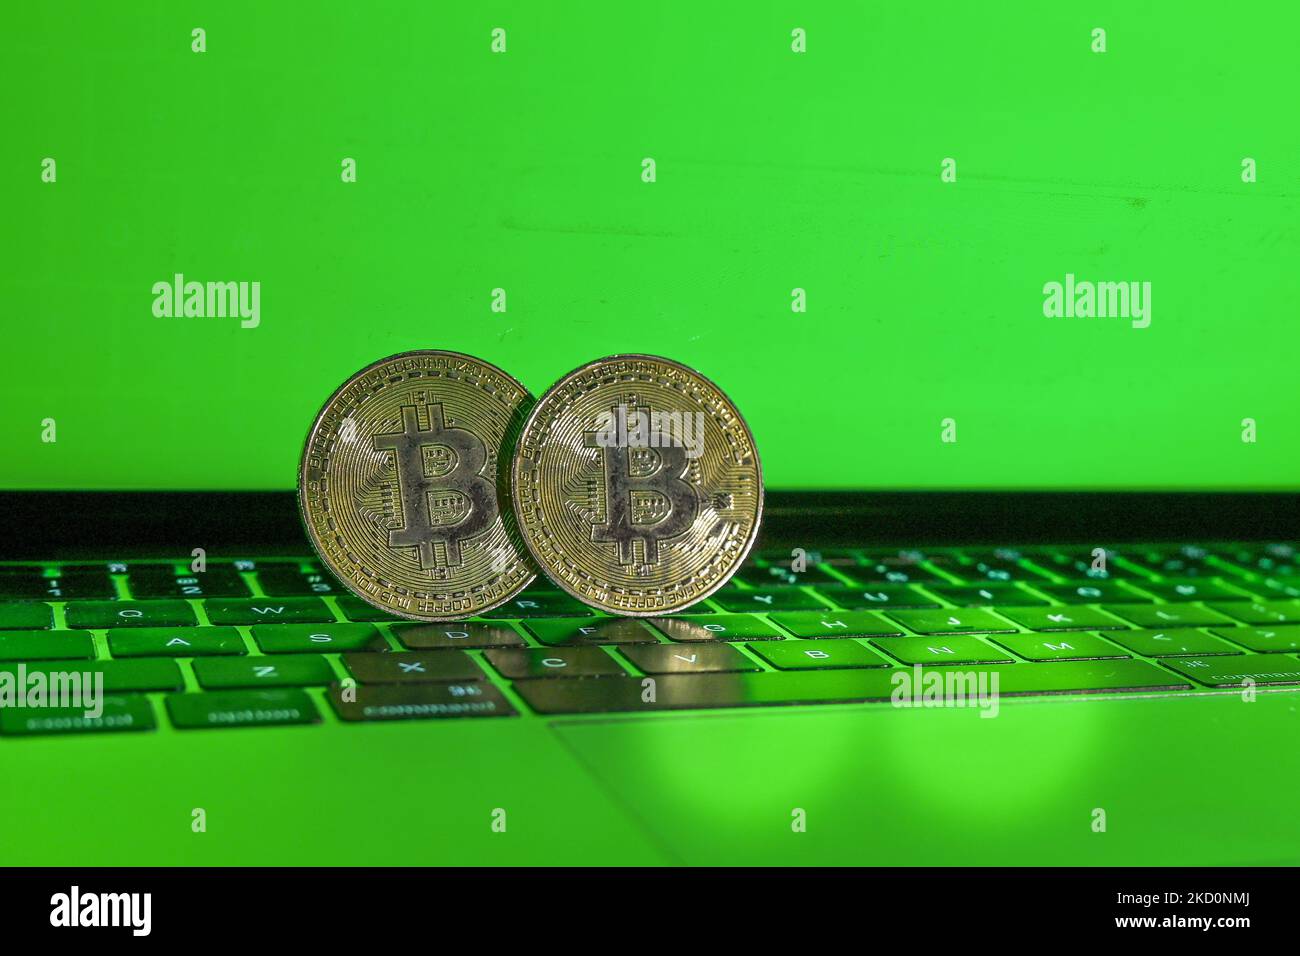 Illustrative image of two commemorative bitcoins with a green background. On Wednesday, January 19, 2021, in Edmonton, Alberta, Canada. (Photo by Artur Widak/NurPhoto) Stock Photo